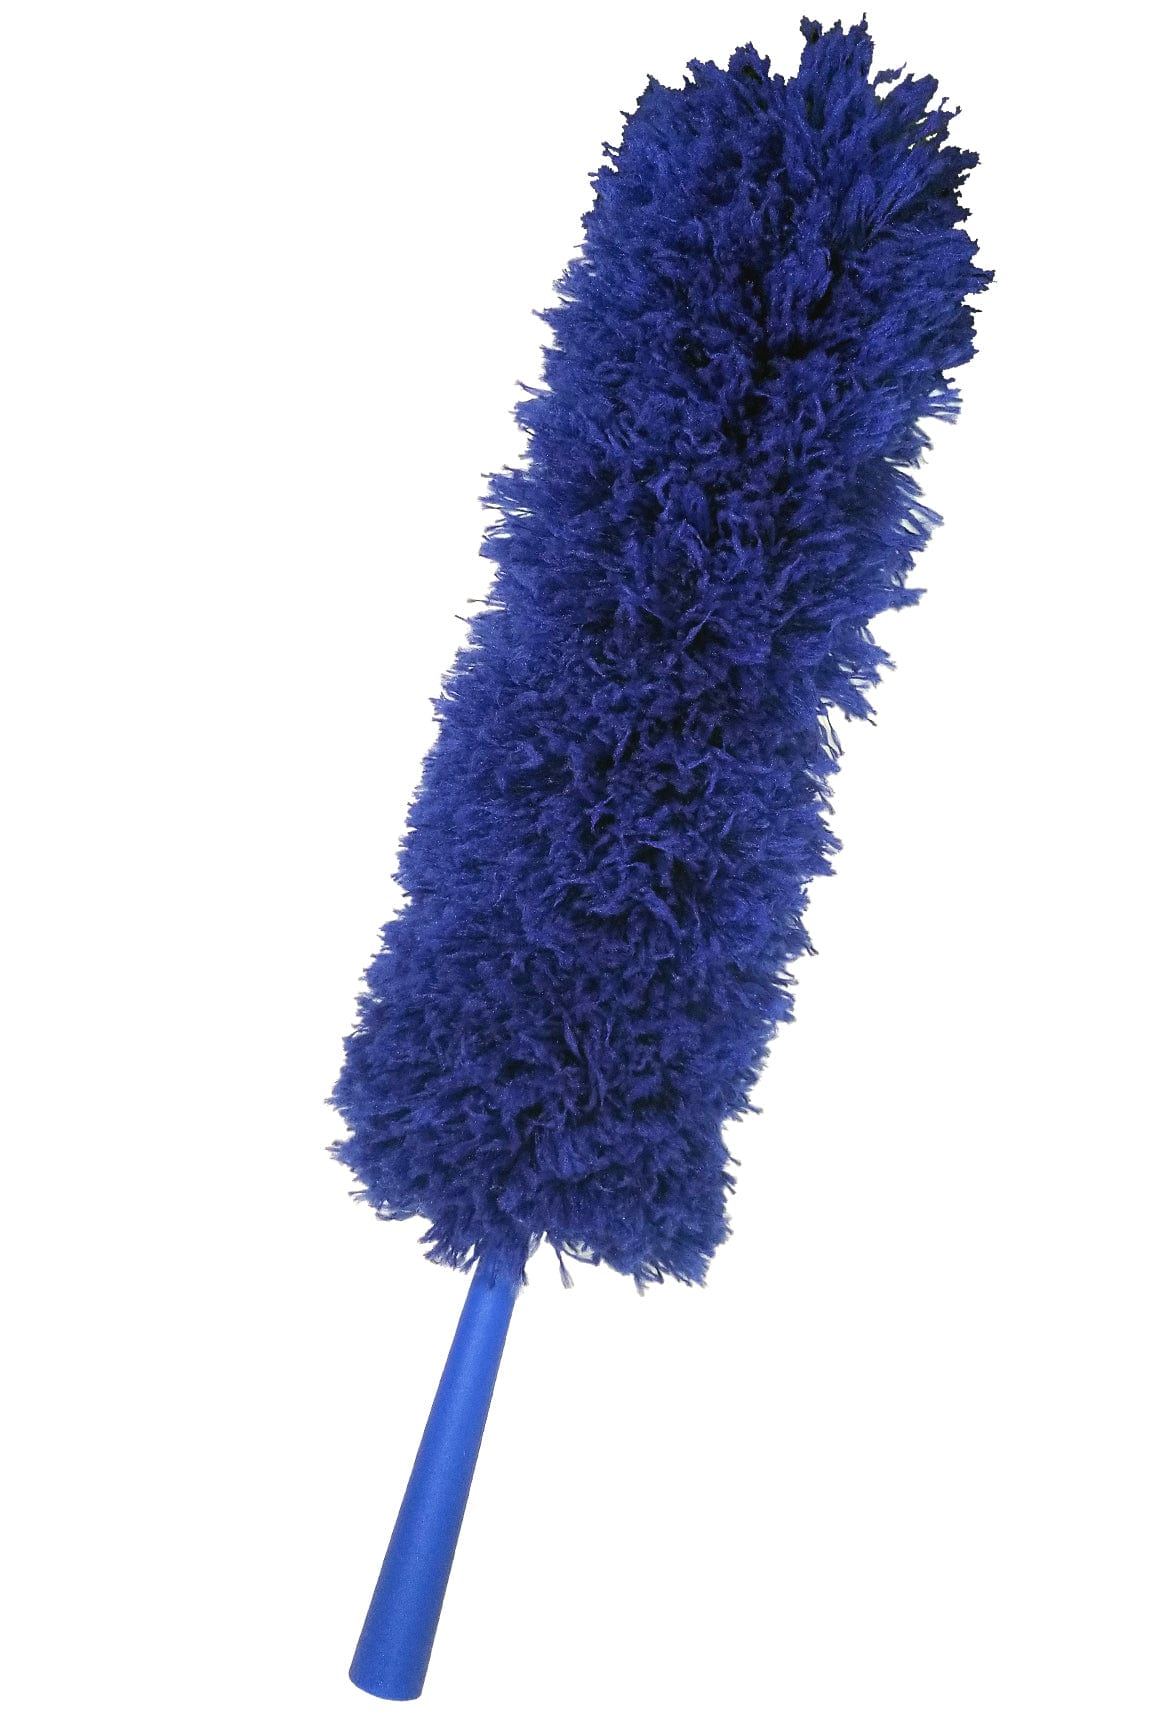 Synthetic Feather Duster | Supply Master | Accra, Ghana Janitorial & Cleaning Buy Tools hardware Building materials